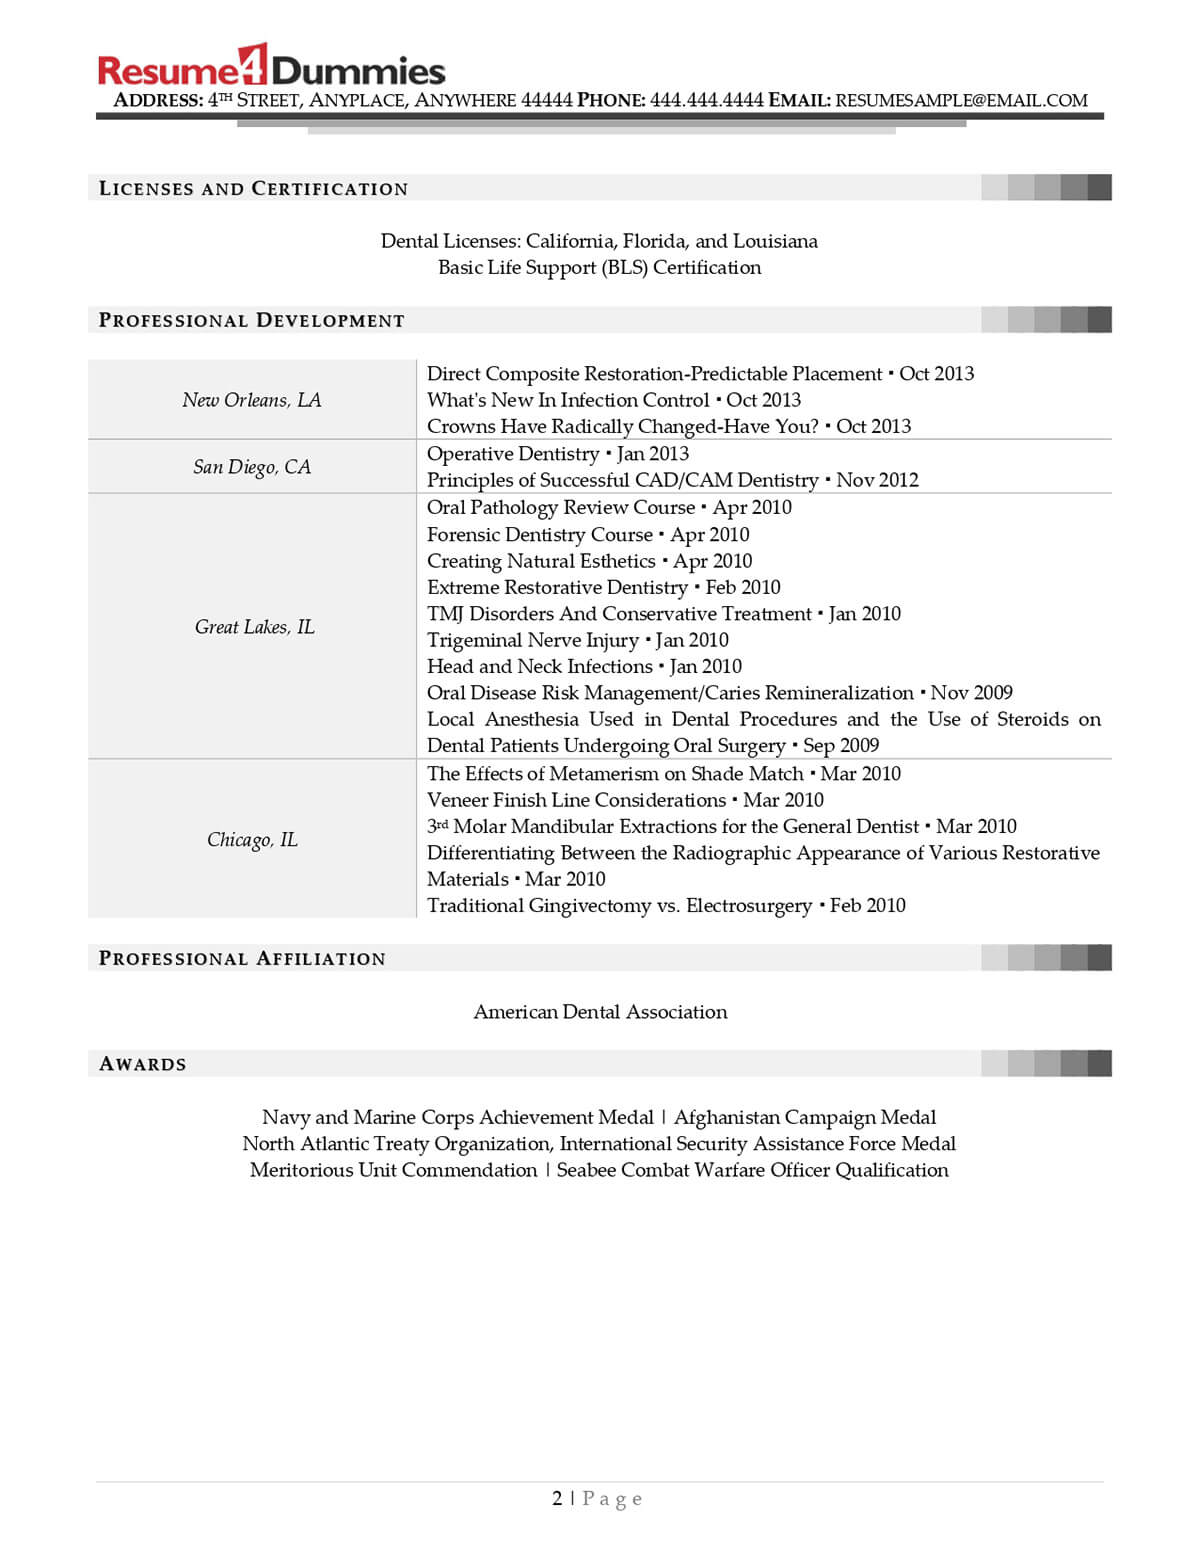 resume4 dummies dentist resume example page two